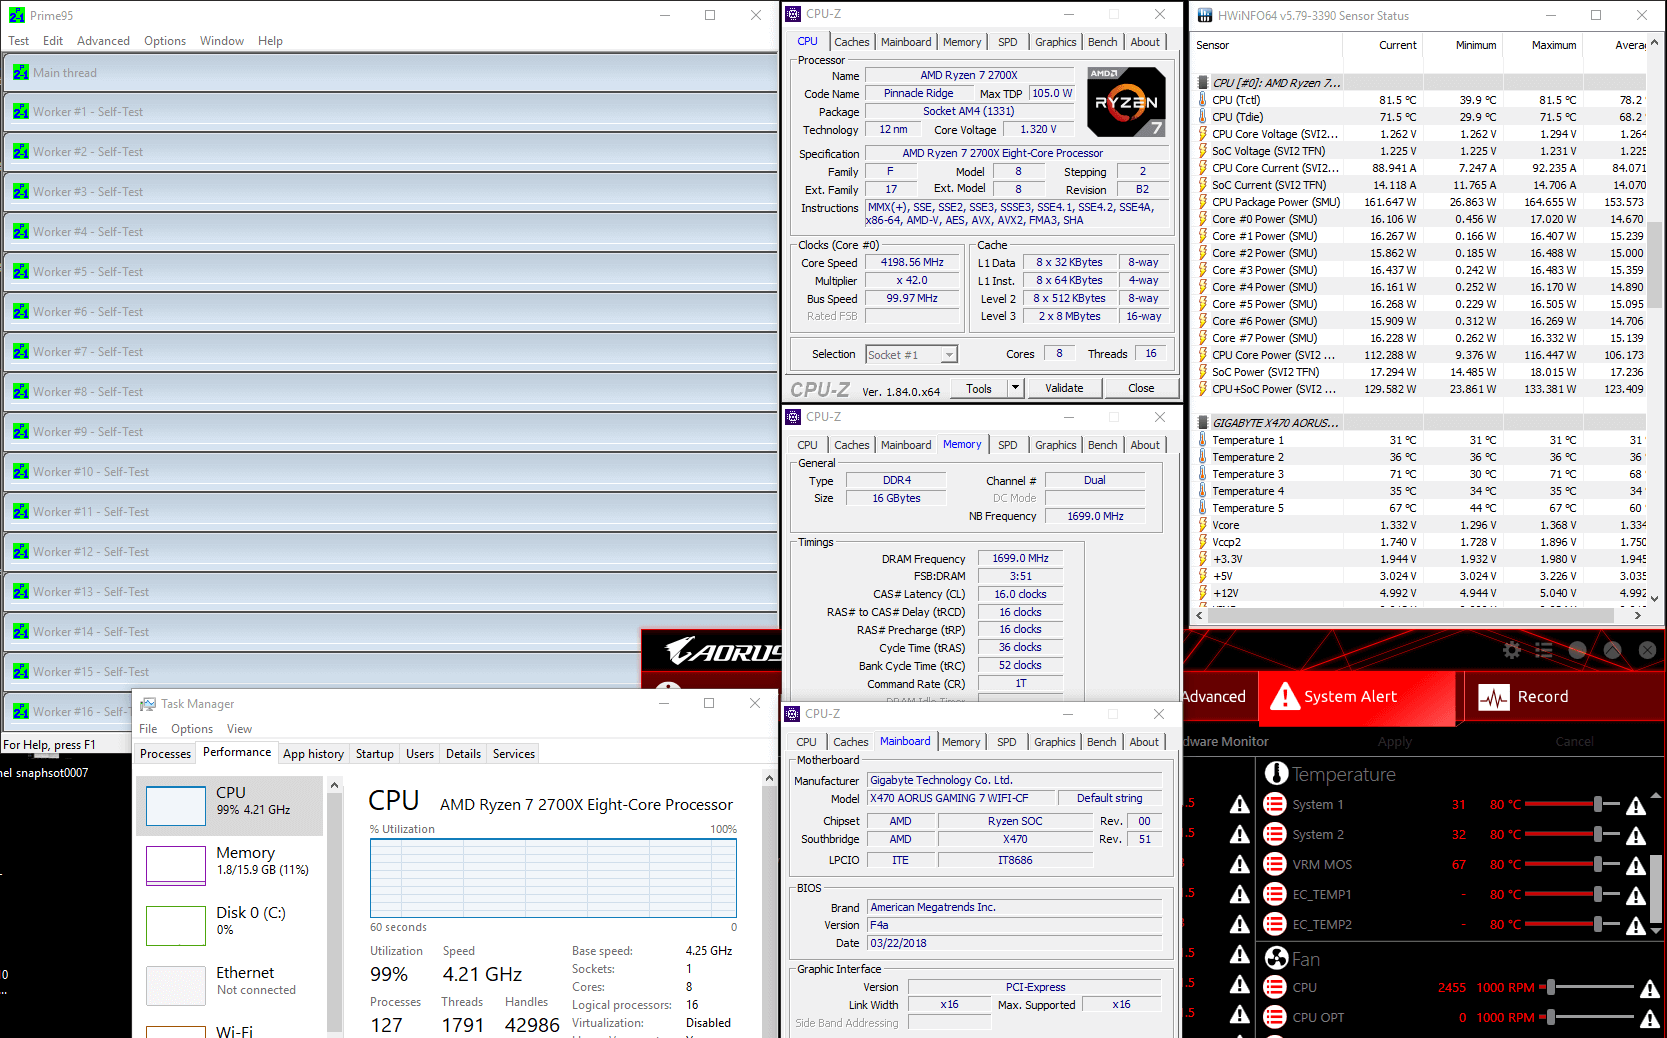 AMD Ryzen 2700X with stable overclocking to 4.2GHz on X470 AORUS Gaming 7 WIFI